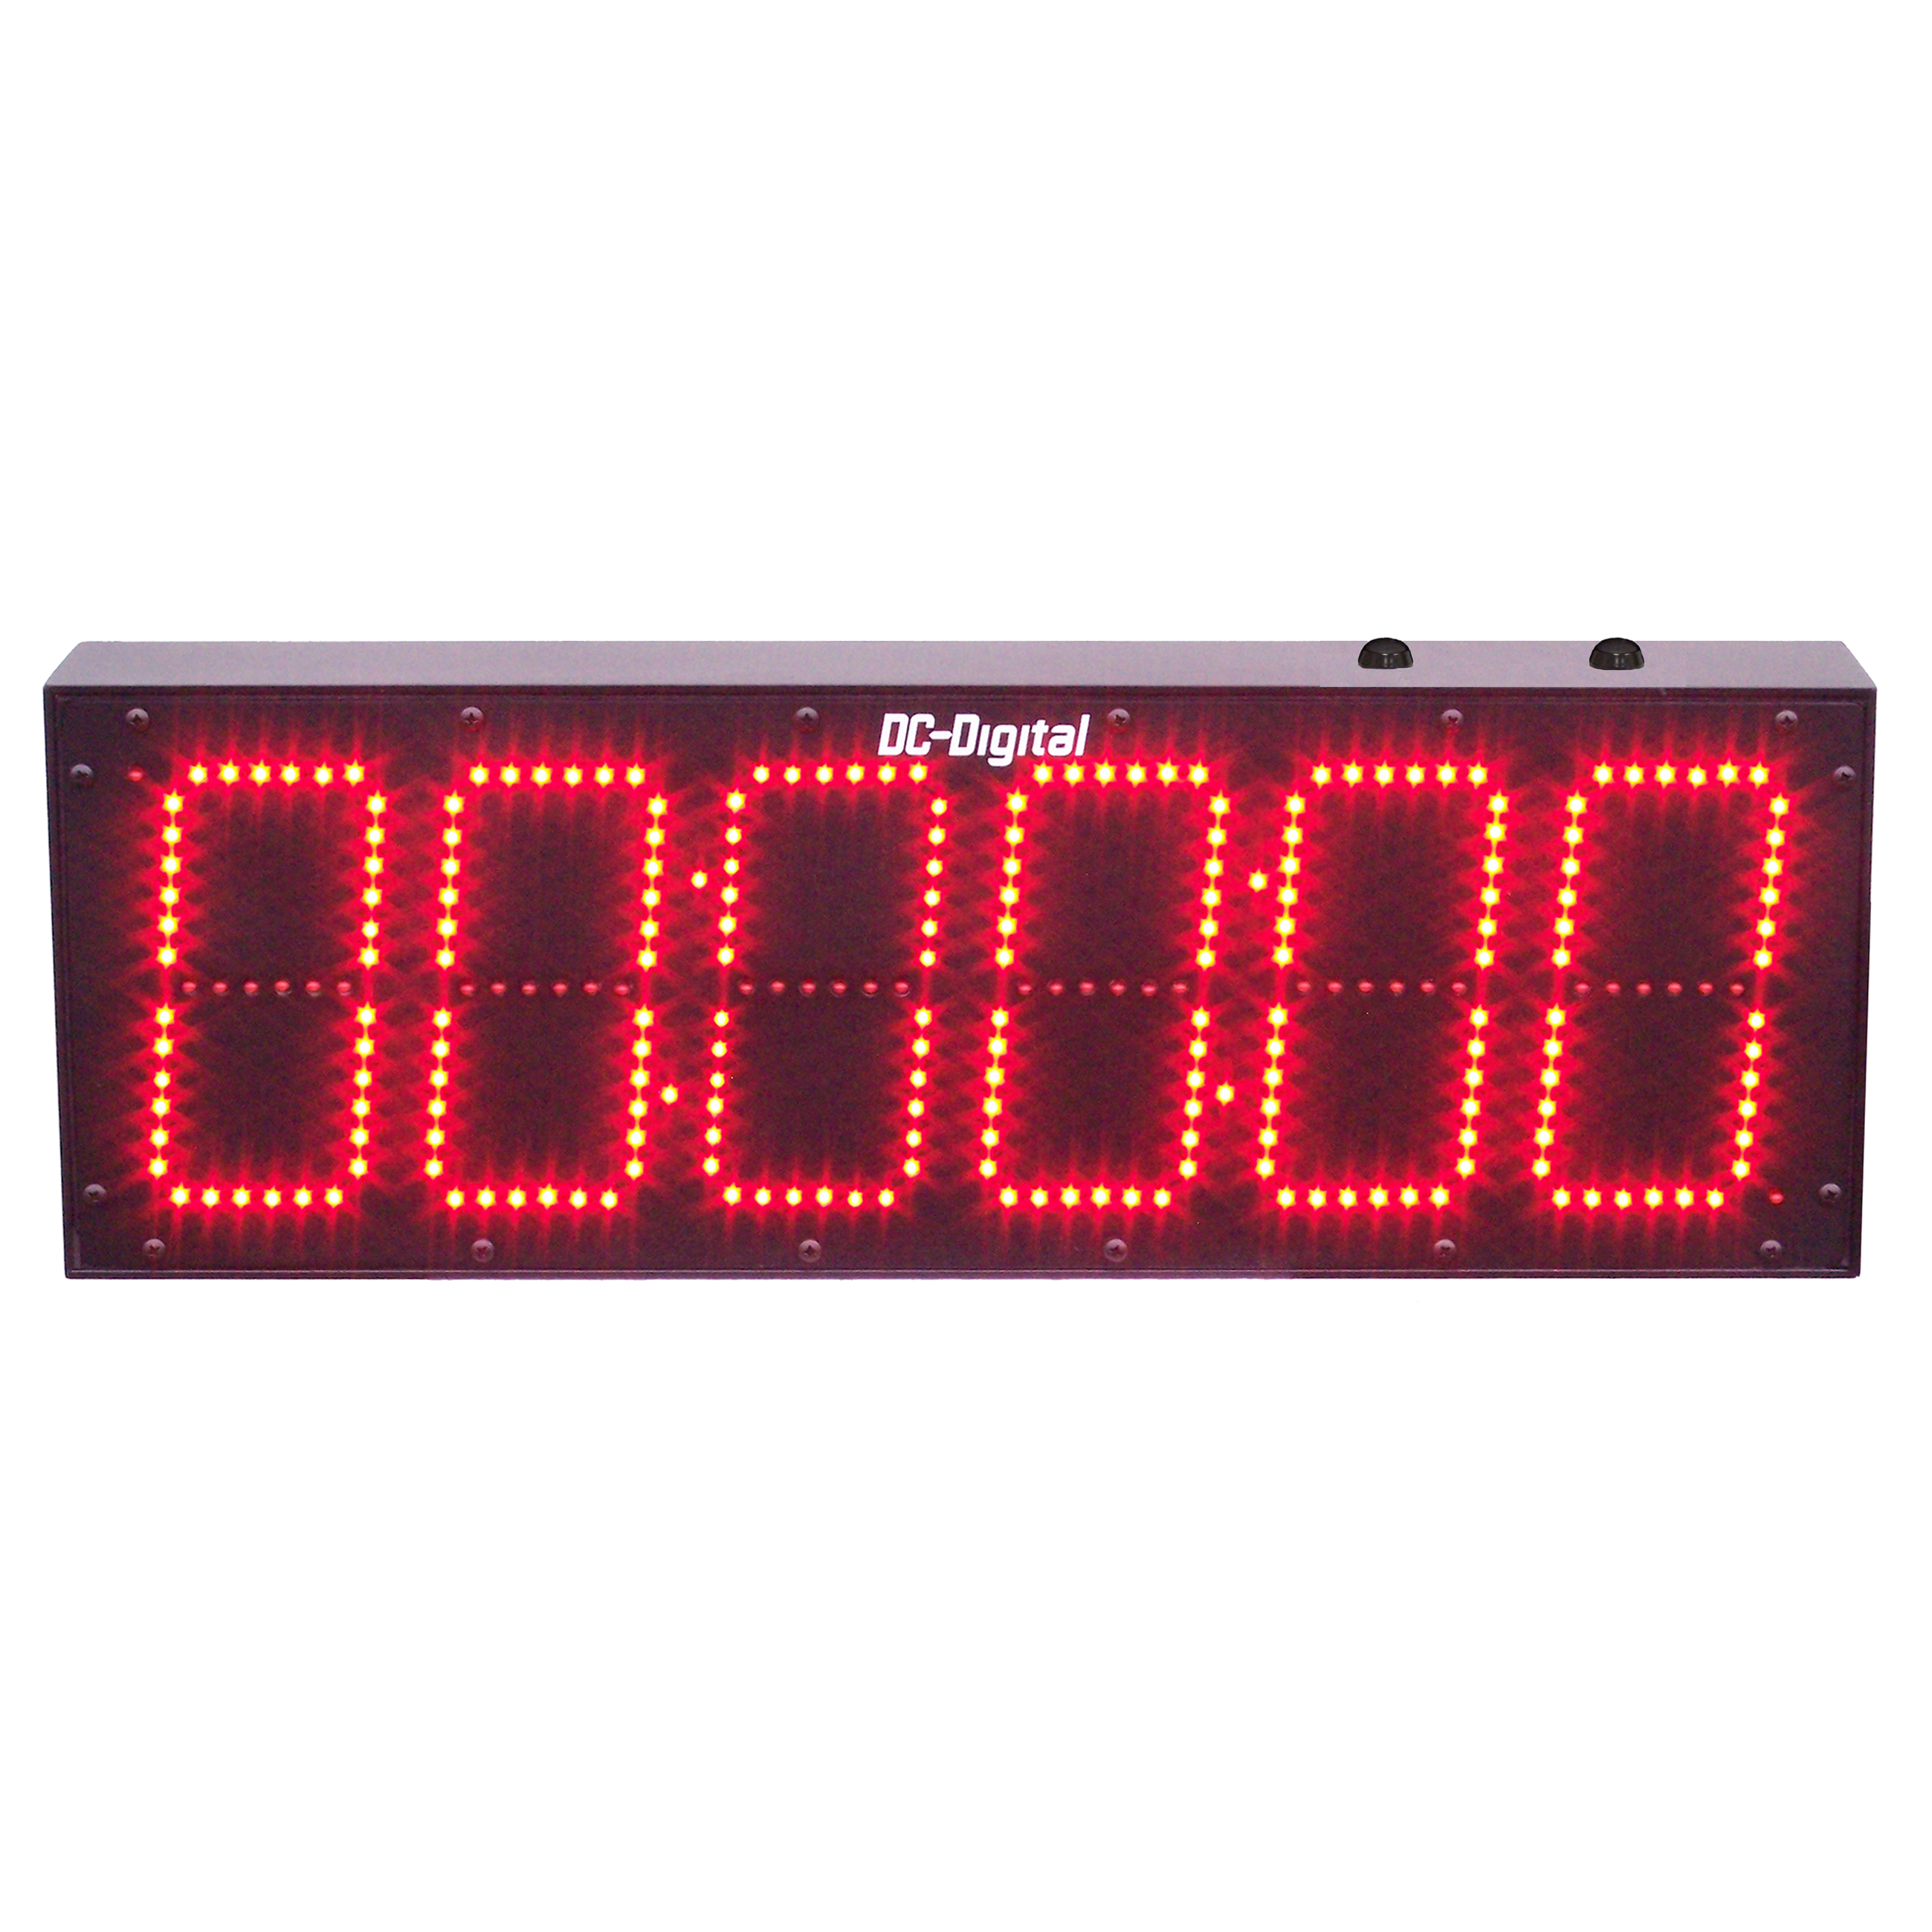 (DC-606T-UP) 6.0 Inch LED Digital, Push-Button Controlled, Count Up Timer, Hours, Minutes, Seconds (OUTDOOR)